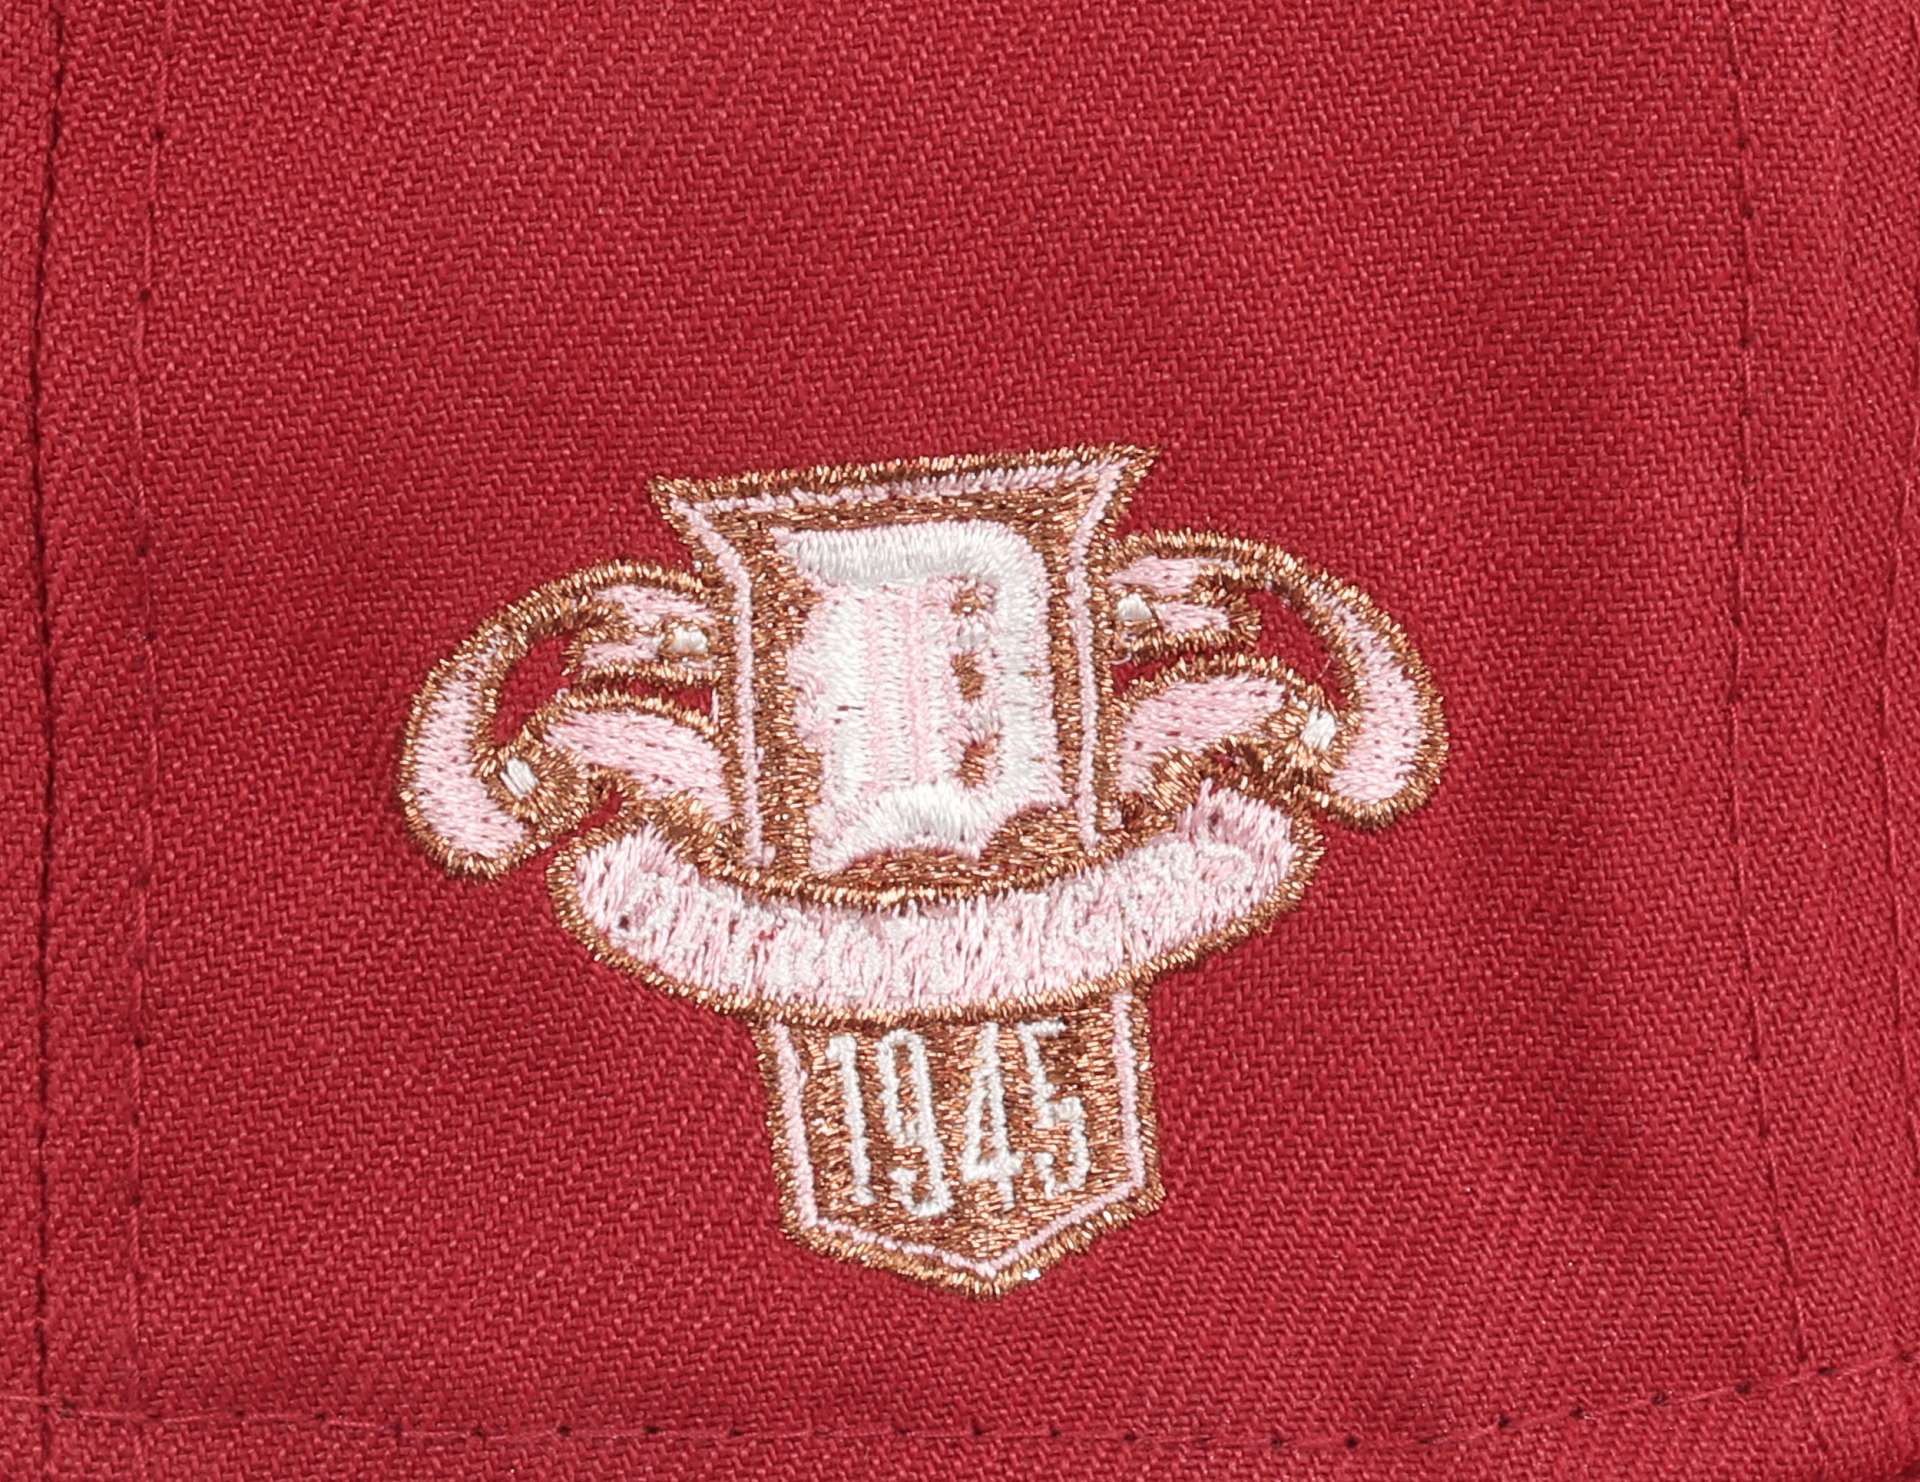 Detroit Tigers MLB Cooperstown American League Title 1945 Sidepatch Pinot Red 59Fifty Basecap New Era